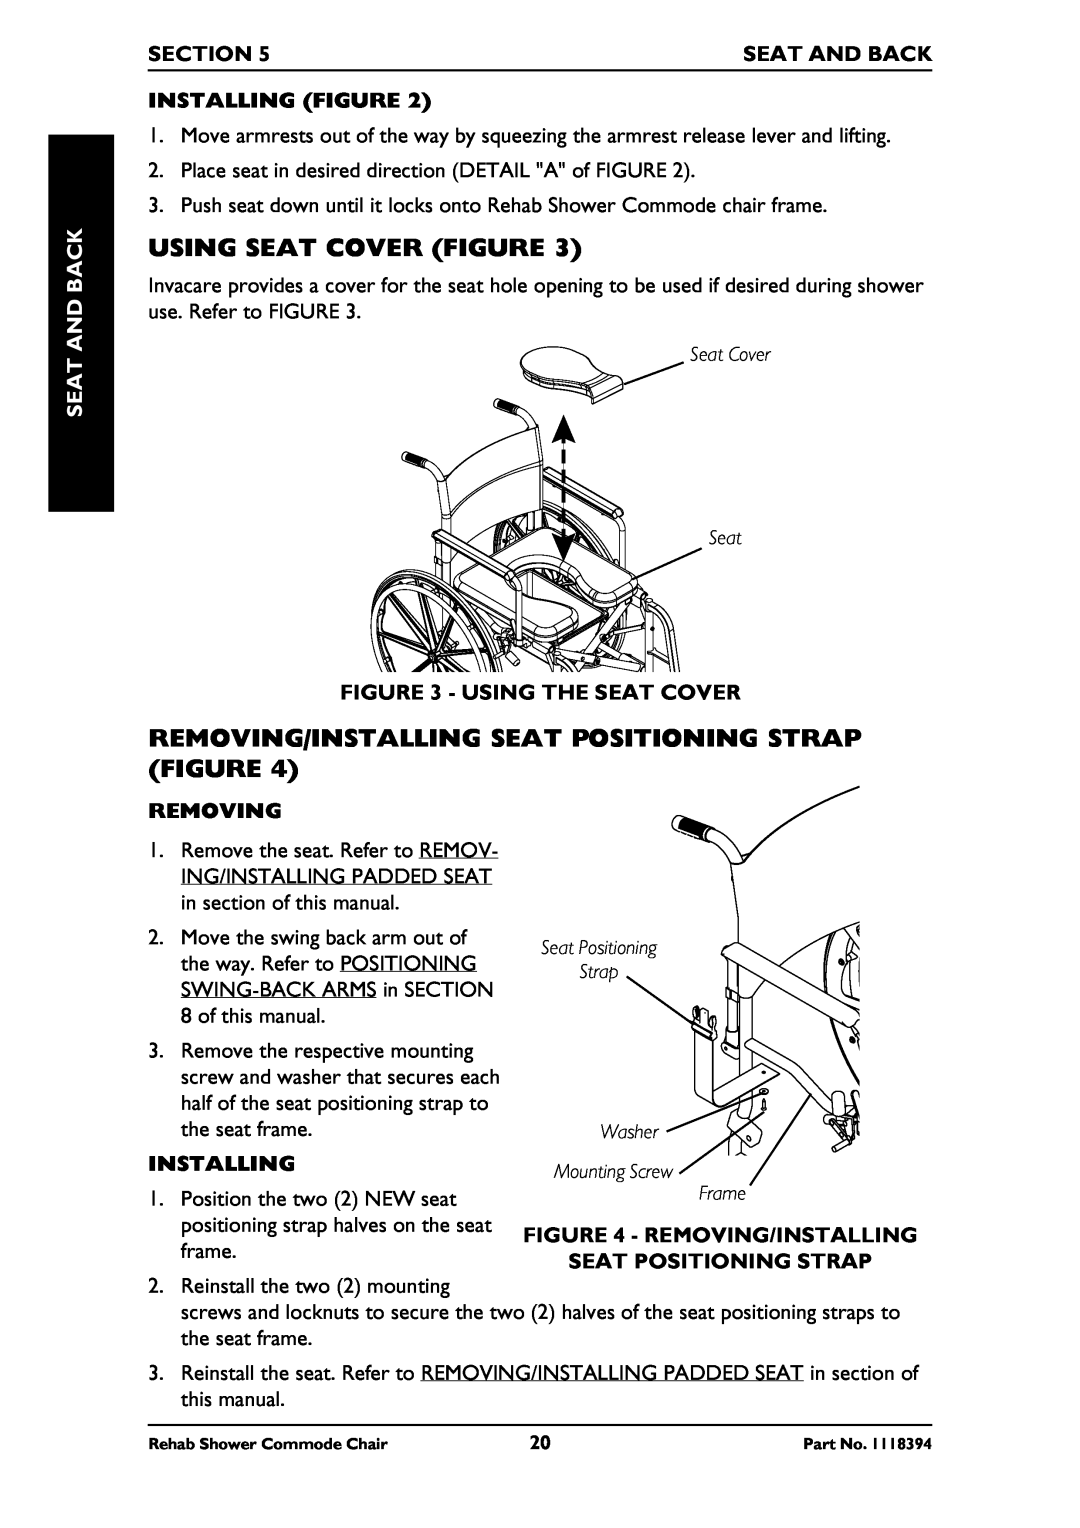 Invacare 6891, 6795 Using Seat Cover Figure, Removing/Installing Seat Positioning Strap Figure, Seat And Back, Section 